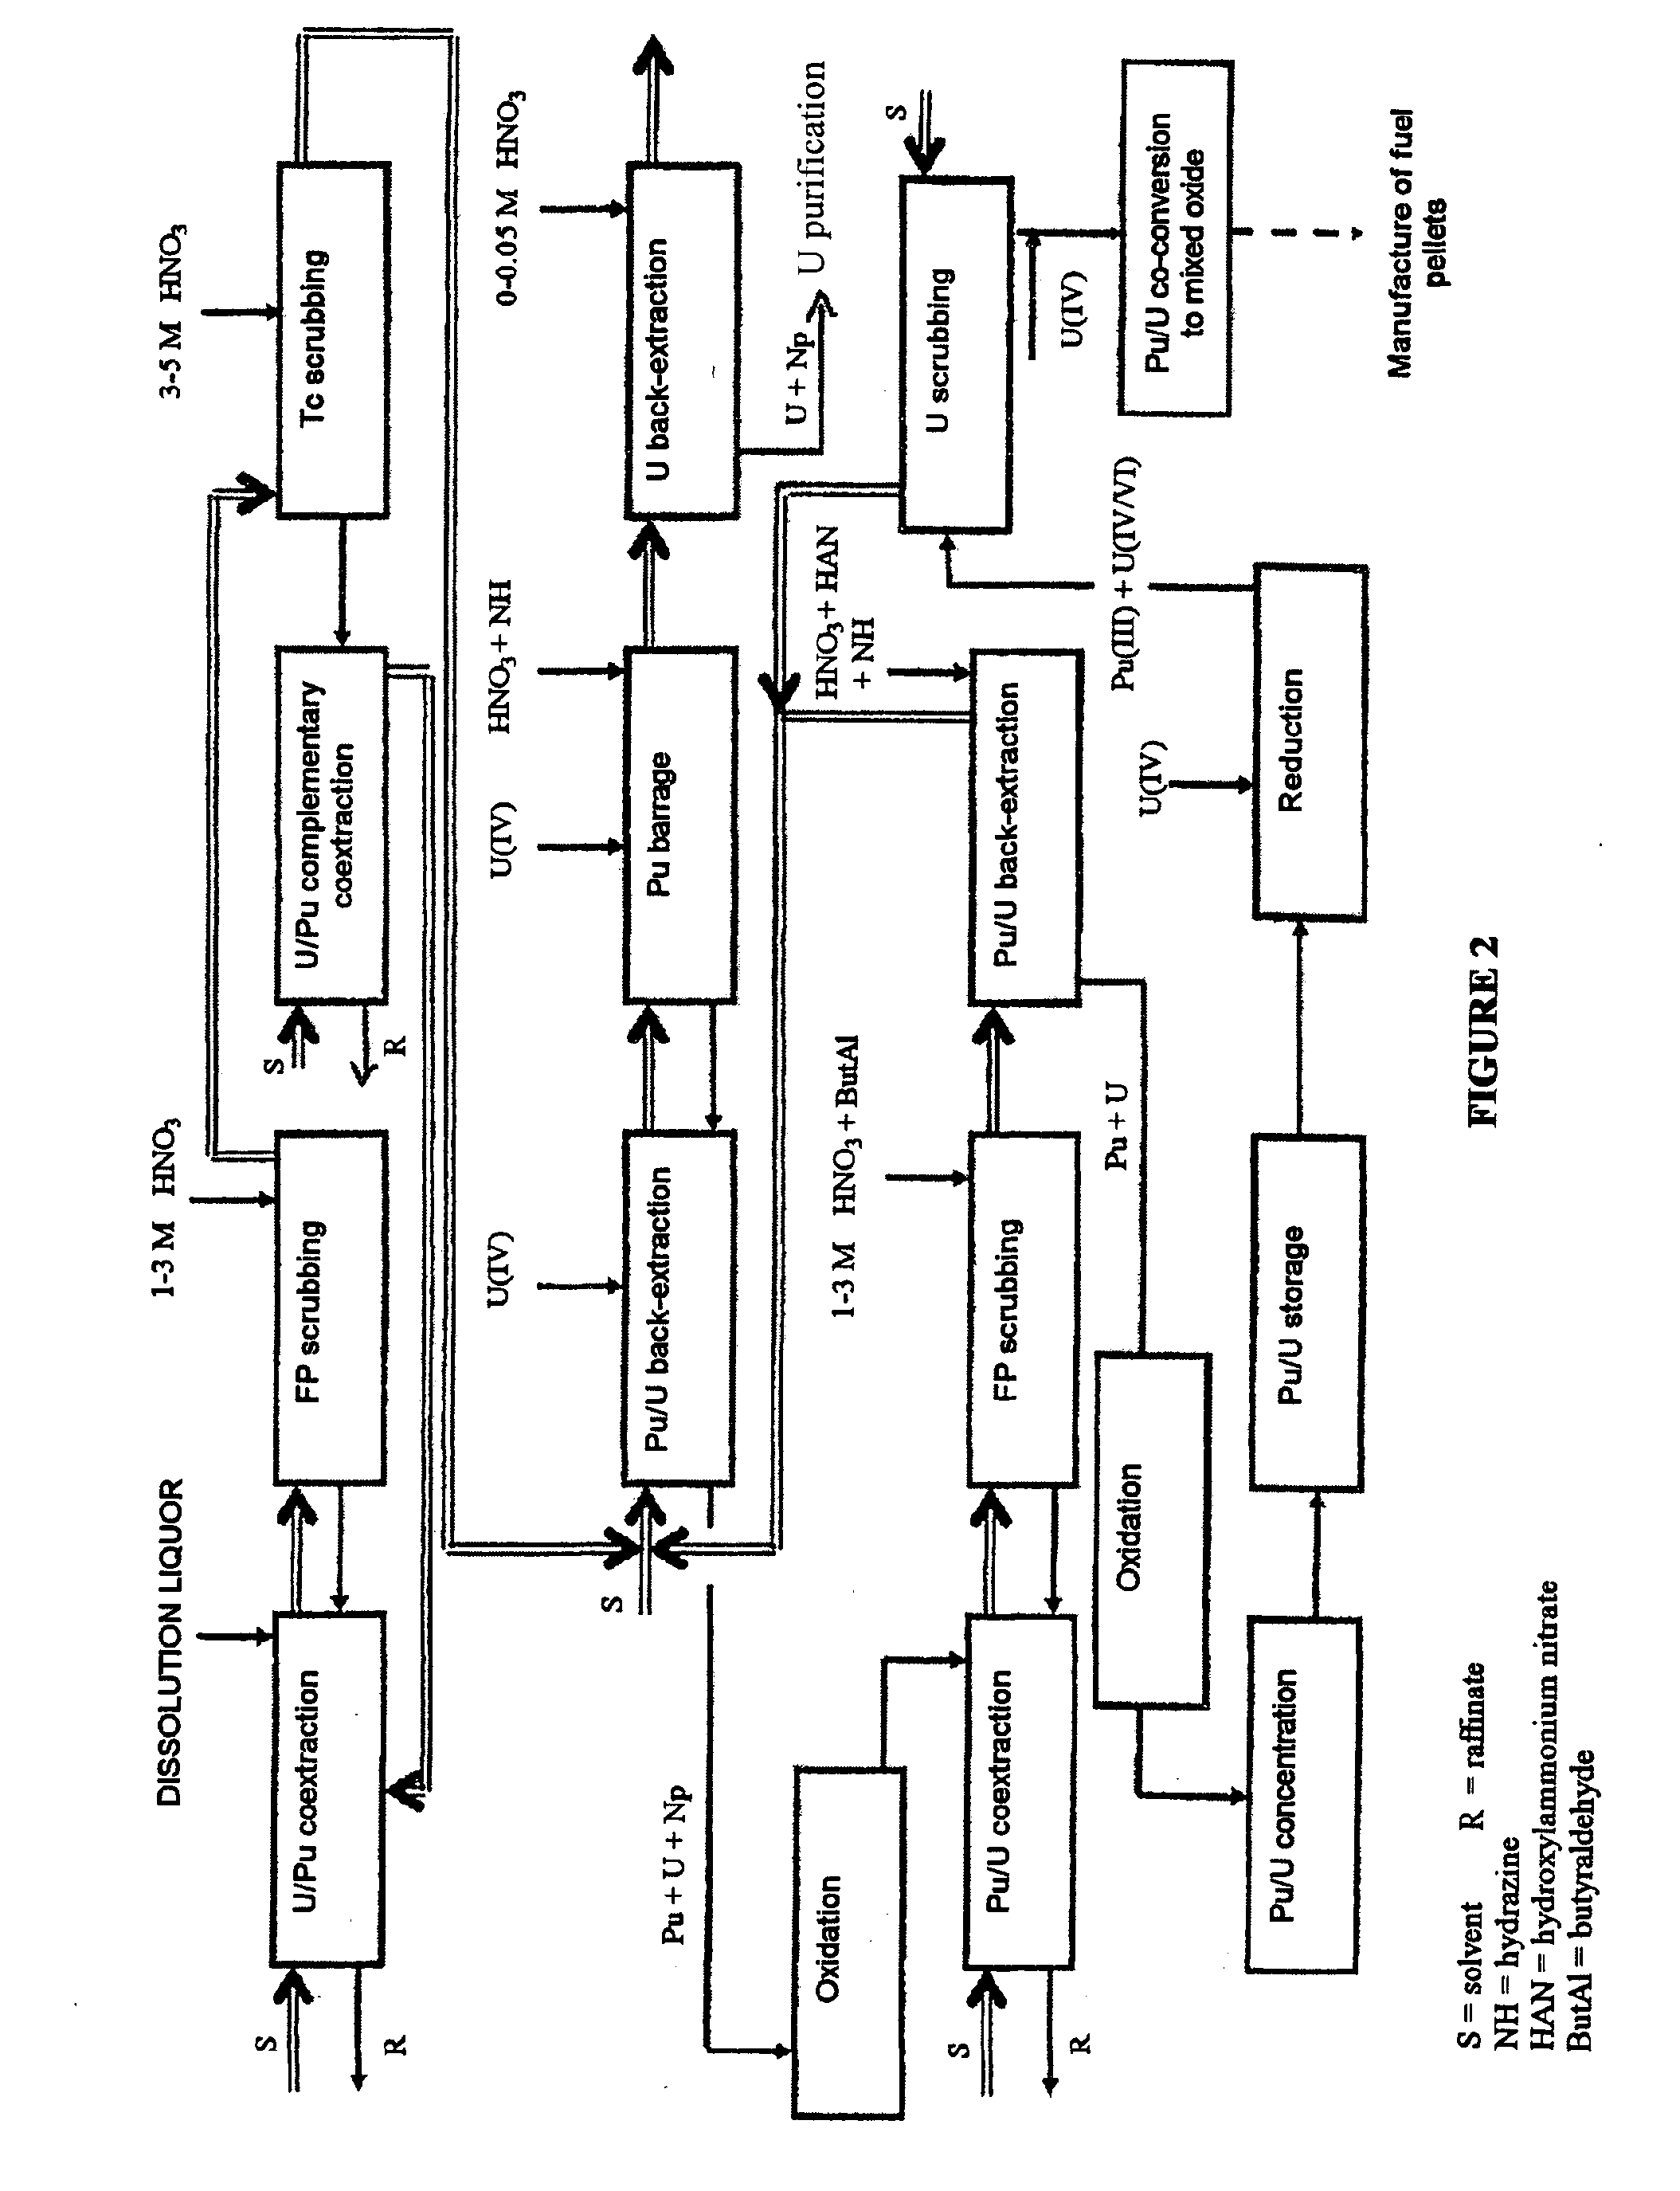 Process for reprocessing a spent nuclear fuel and of preparing a mixed uranium-plutonium oxide